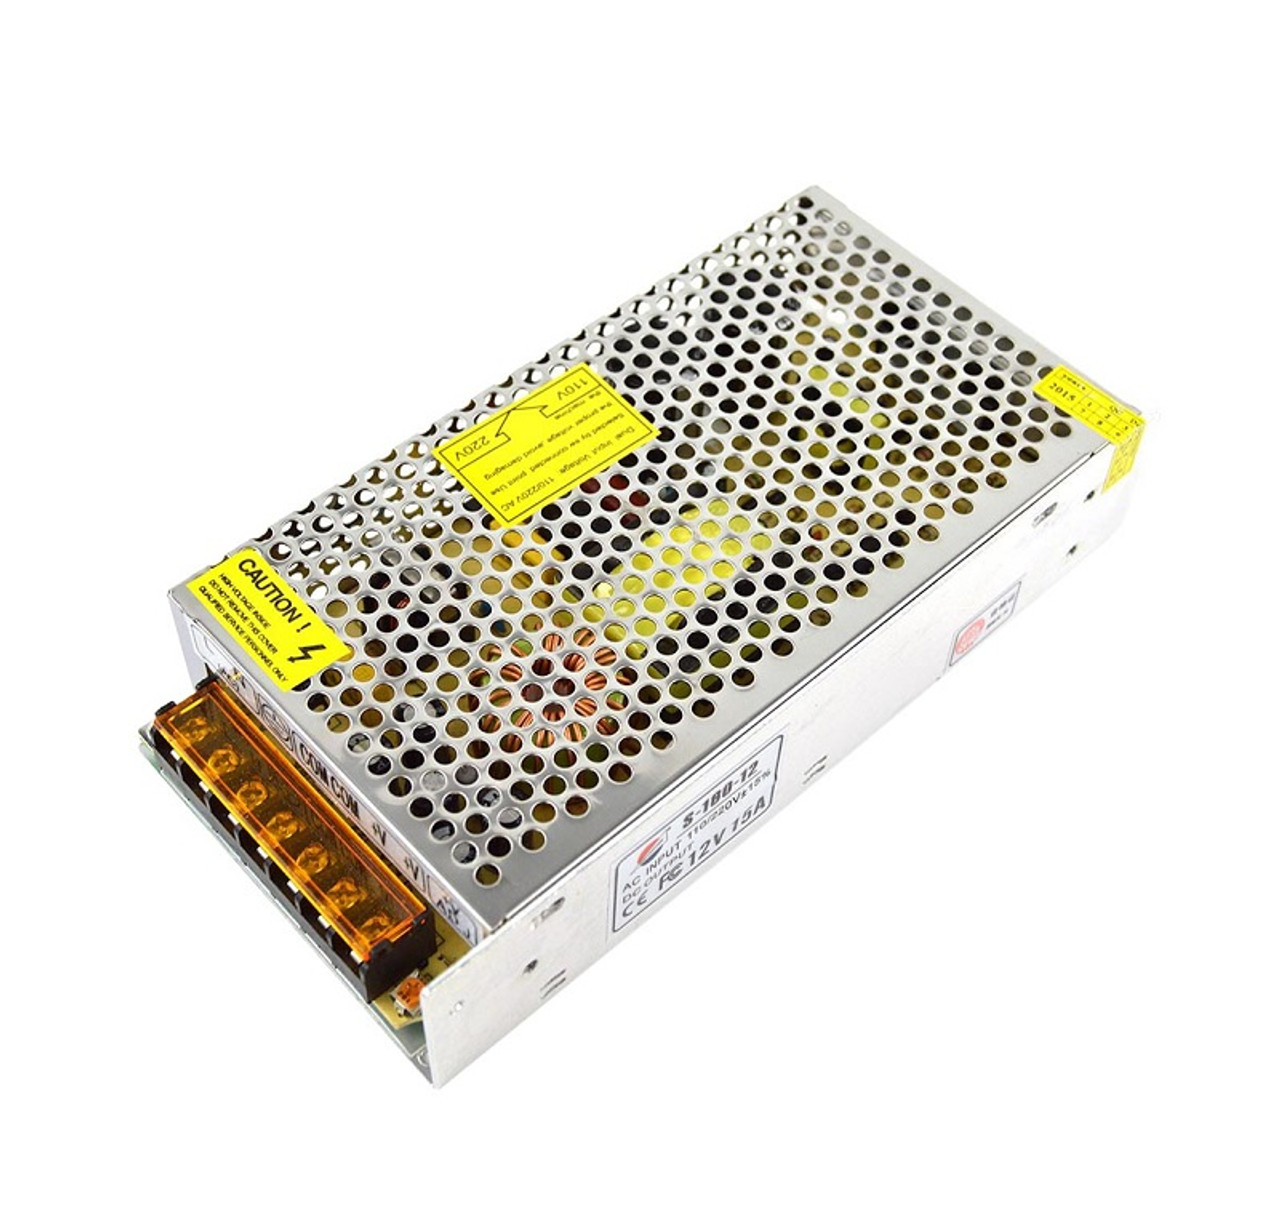 RM1-6754-000CN - HP Low Voltage Power Supply - 220V for Color LaserJet CP5525 / M750 / M775 Series